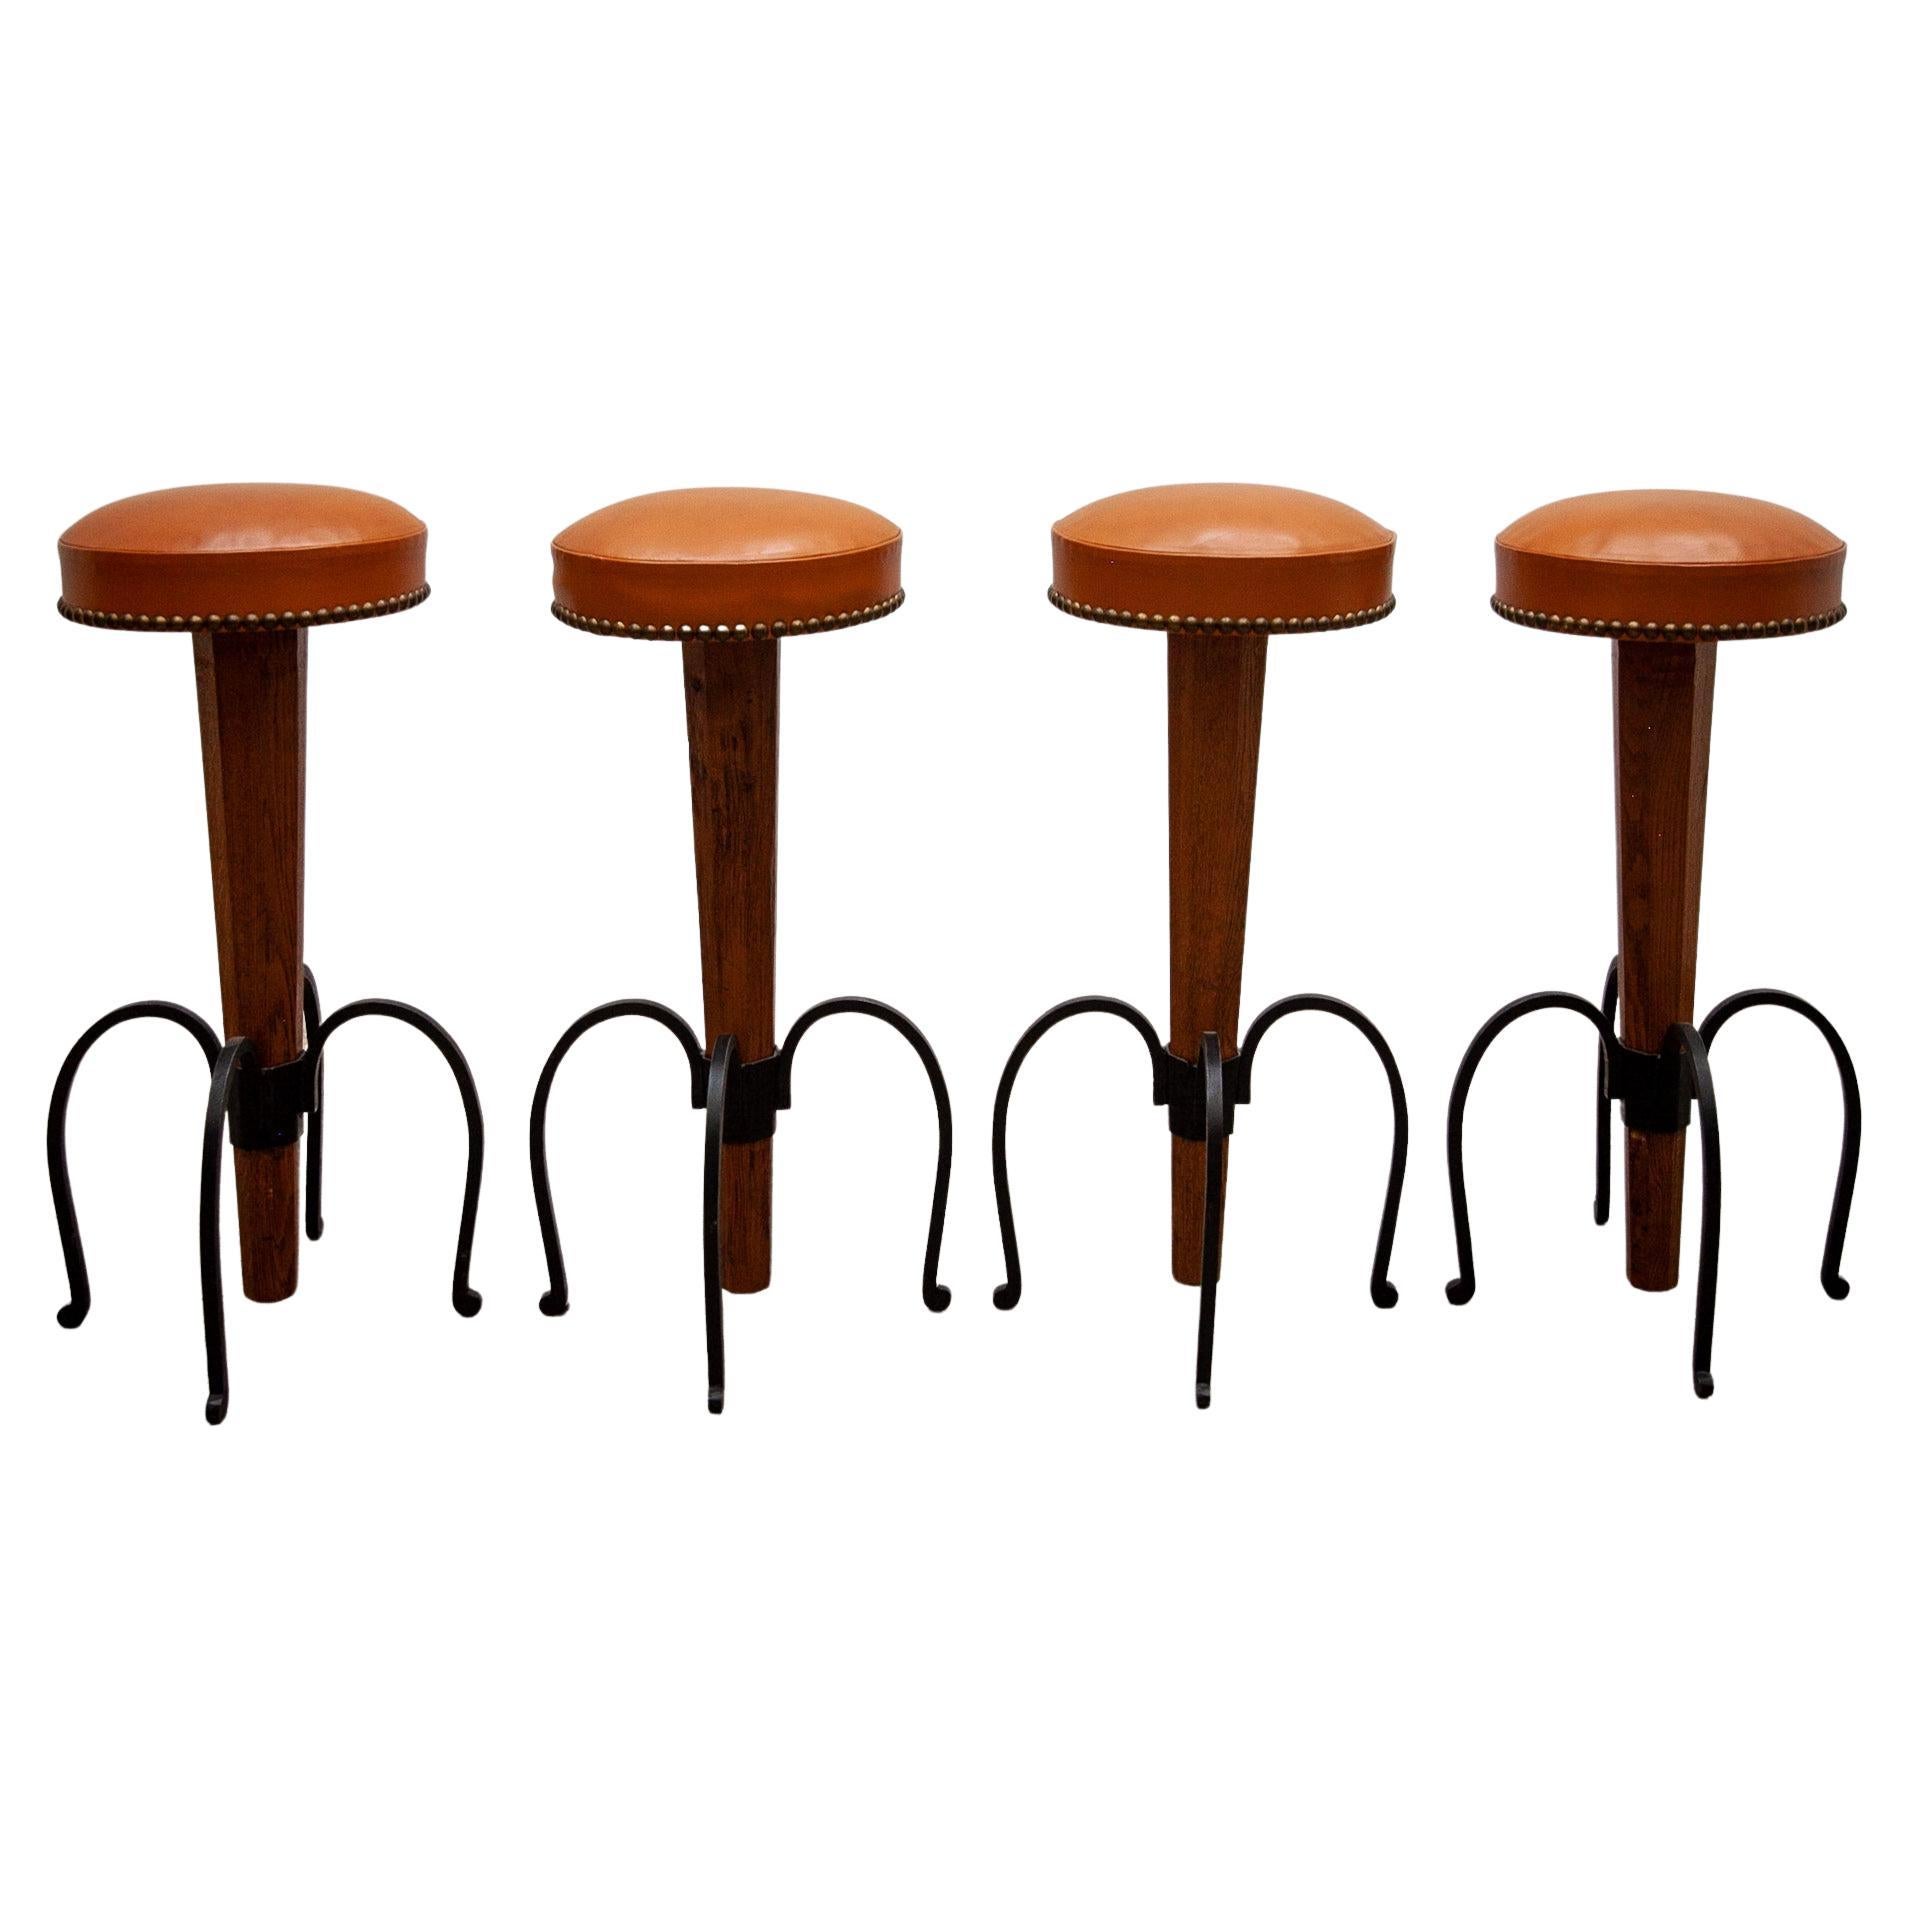 Set of four Brutalist Stools Wrought Iron, Round Camel Leather Seats